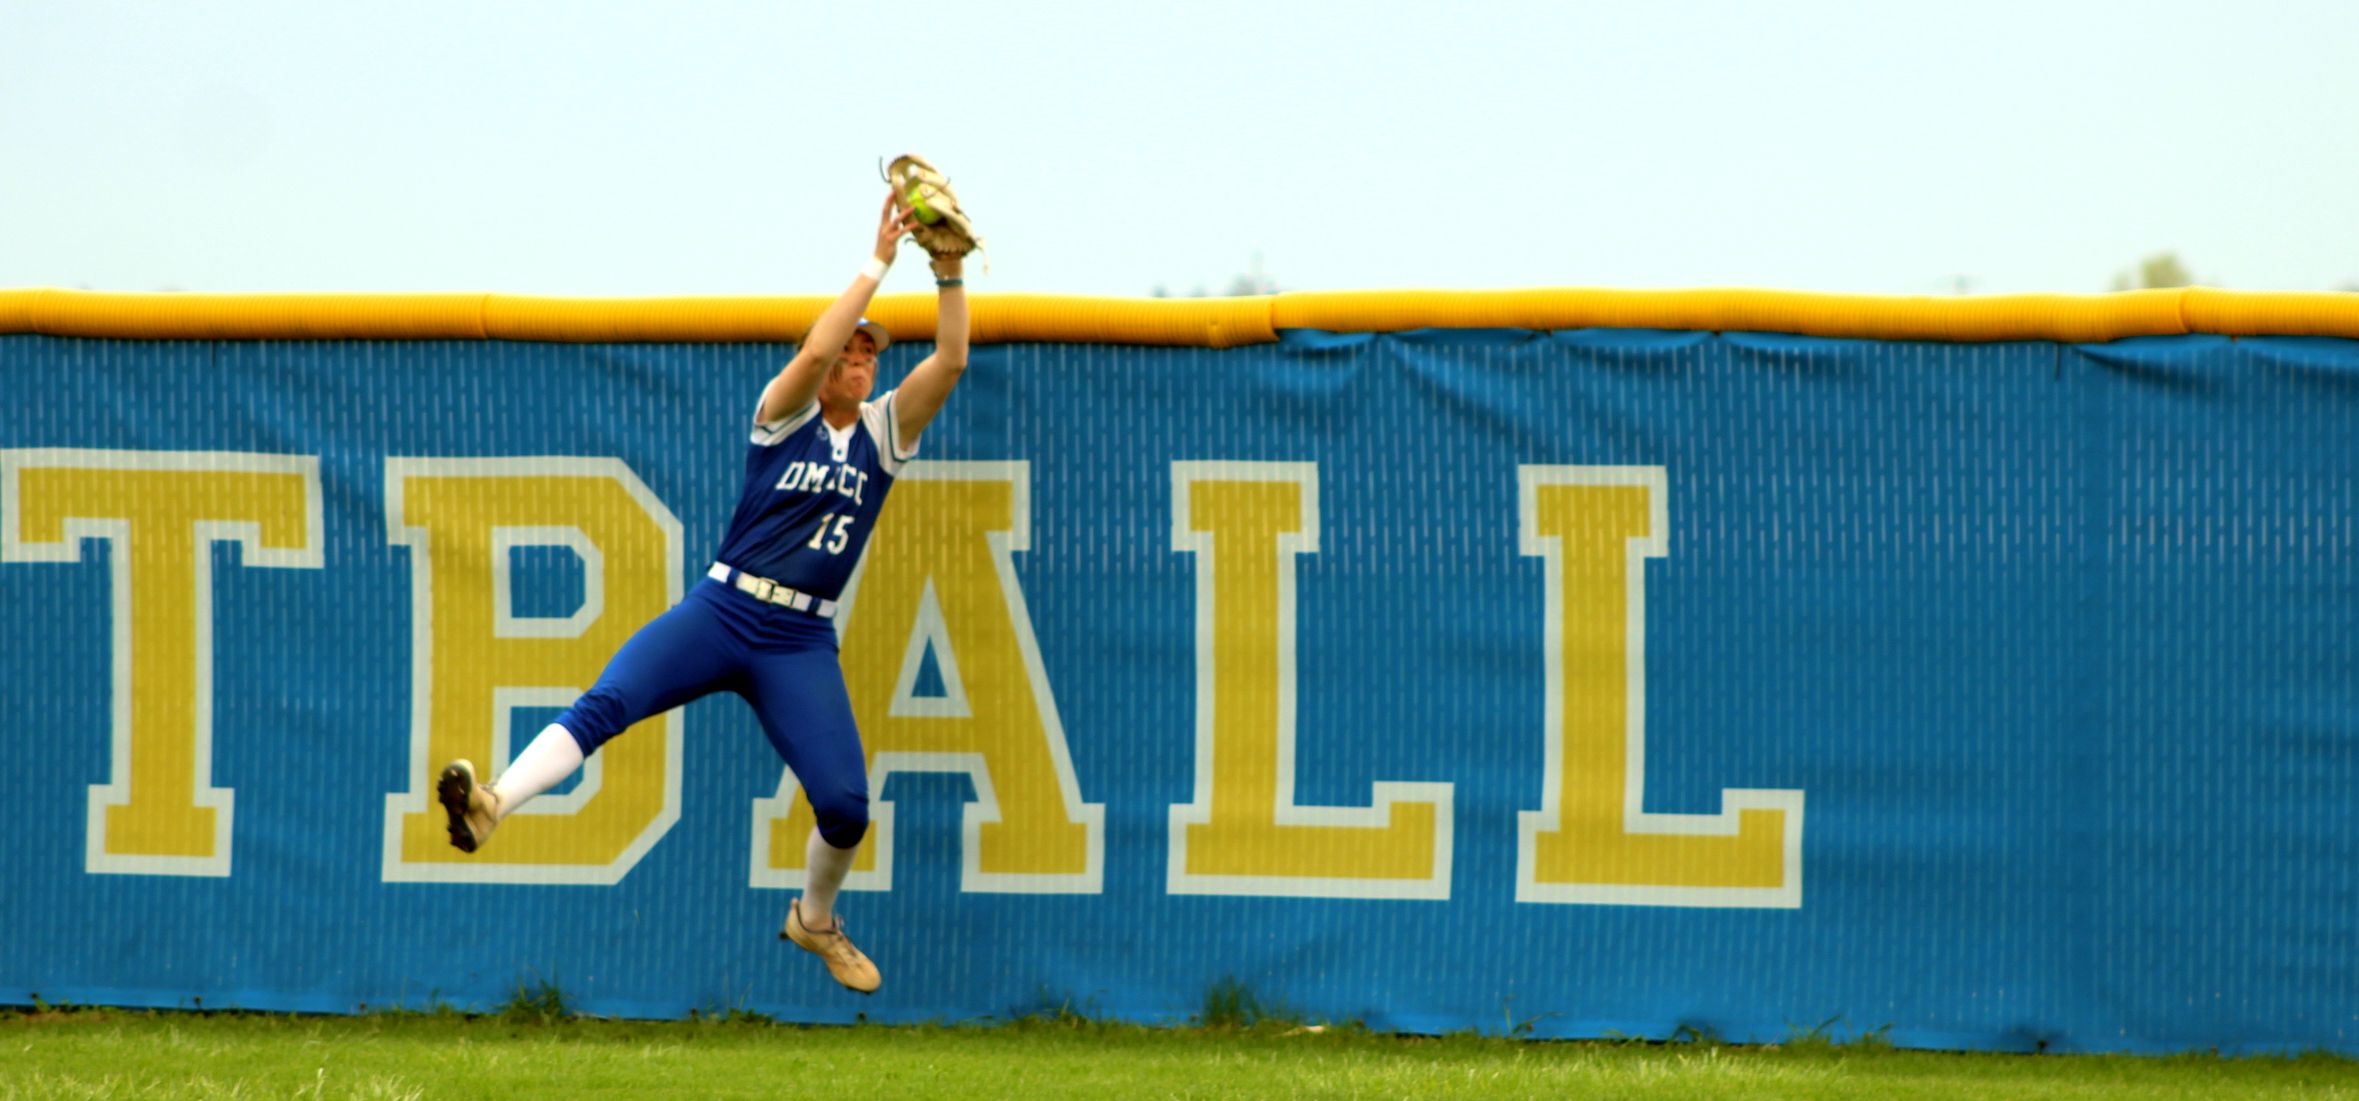 DMACC softball team opens national tournament with 8-3 win